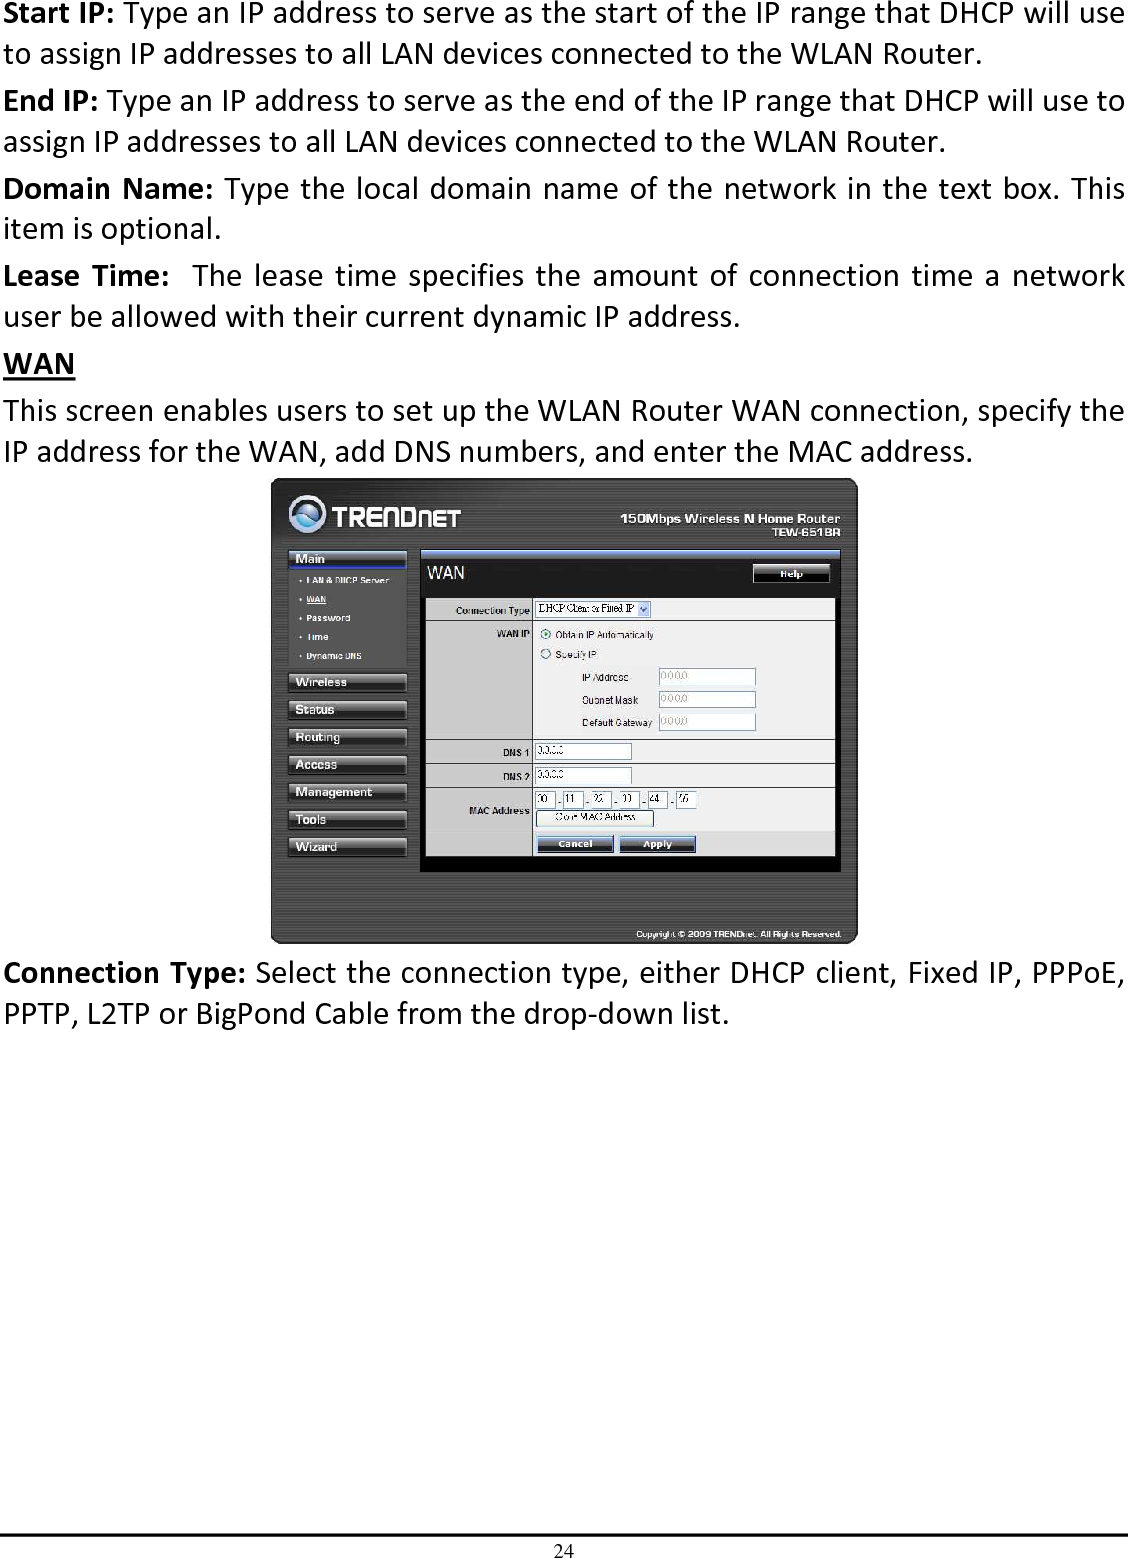 24 Start IP: Type an IP address to serve as the start of the IP range that DHCP will use to assign IP addresses to all LAN devices connected to the WLAN Router. End IP: Type an IP address to serve as the end of the IP range that DHCP will use to assign IP addresses to all LAN devices connected to the WLAN Router. Domain Name: Type the local domain name of the network in the text box. This item is optional. Lease  Time:  The lease time specifies the amount of connection time a network user be allowed with their current dynamic IP address. WAN This screen enables users to set up the WLAN Router WAN connection, specify the IP address for the WAN, add DNS numbers, and enter the MAC address.  Connection Type: Select the connection type, either DHCP client, Fixed IP, PPPoE, PPTP, L2TP or BigPond Cable from the drop-down list. 